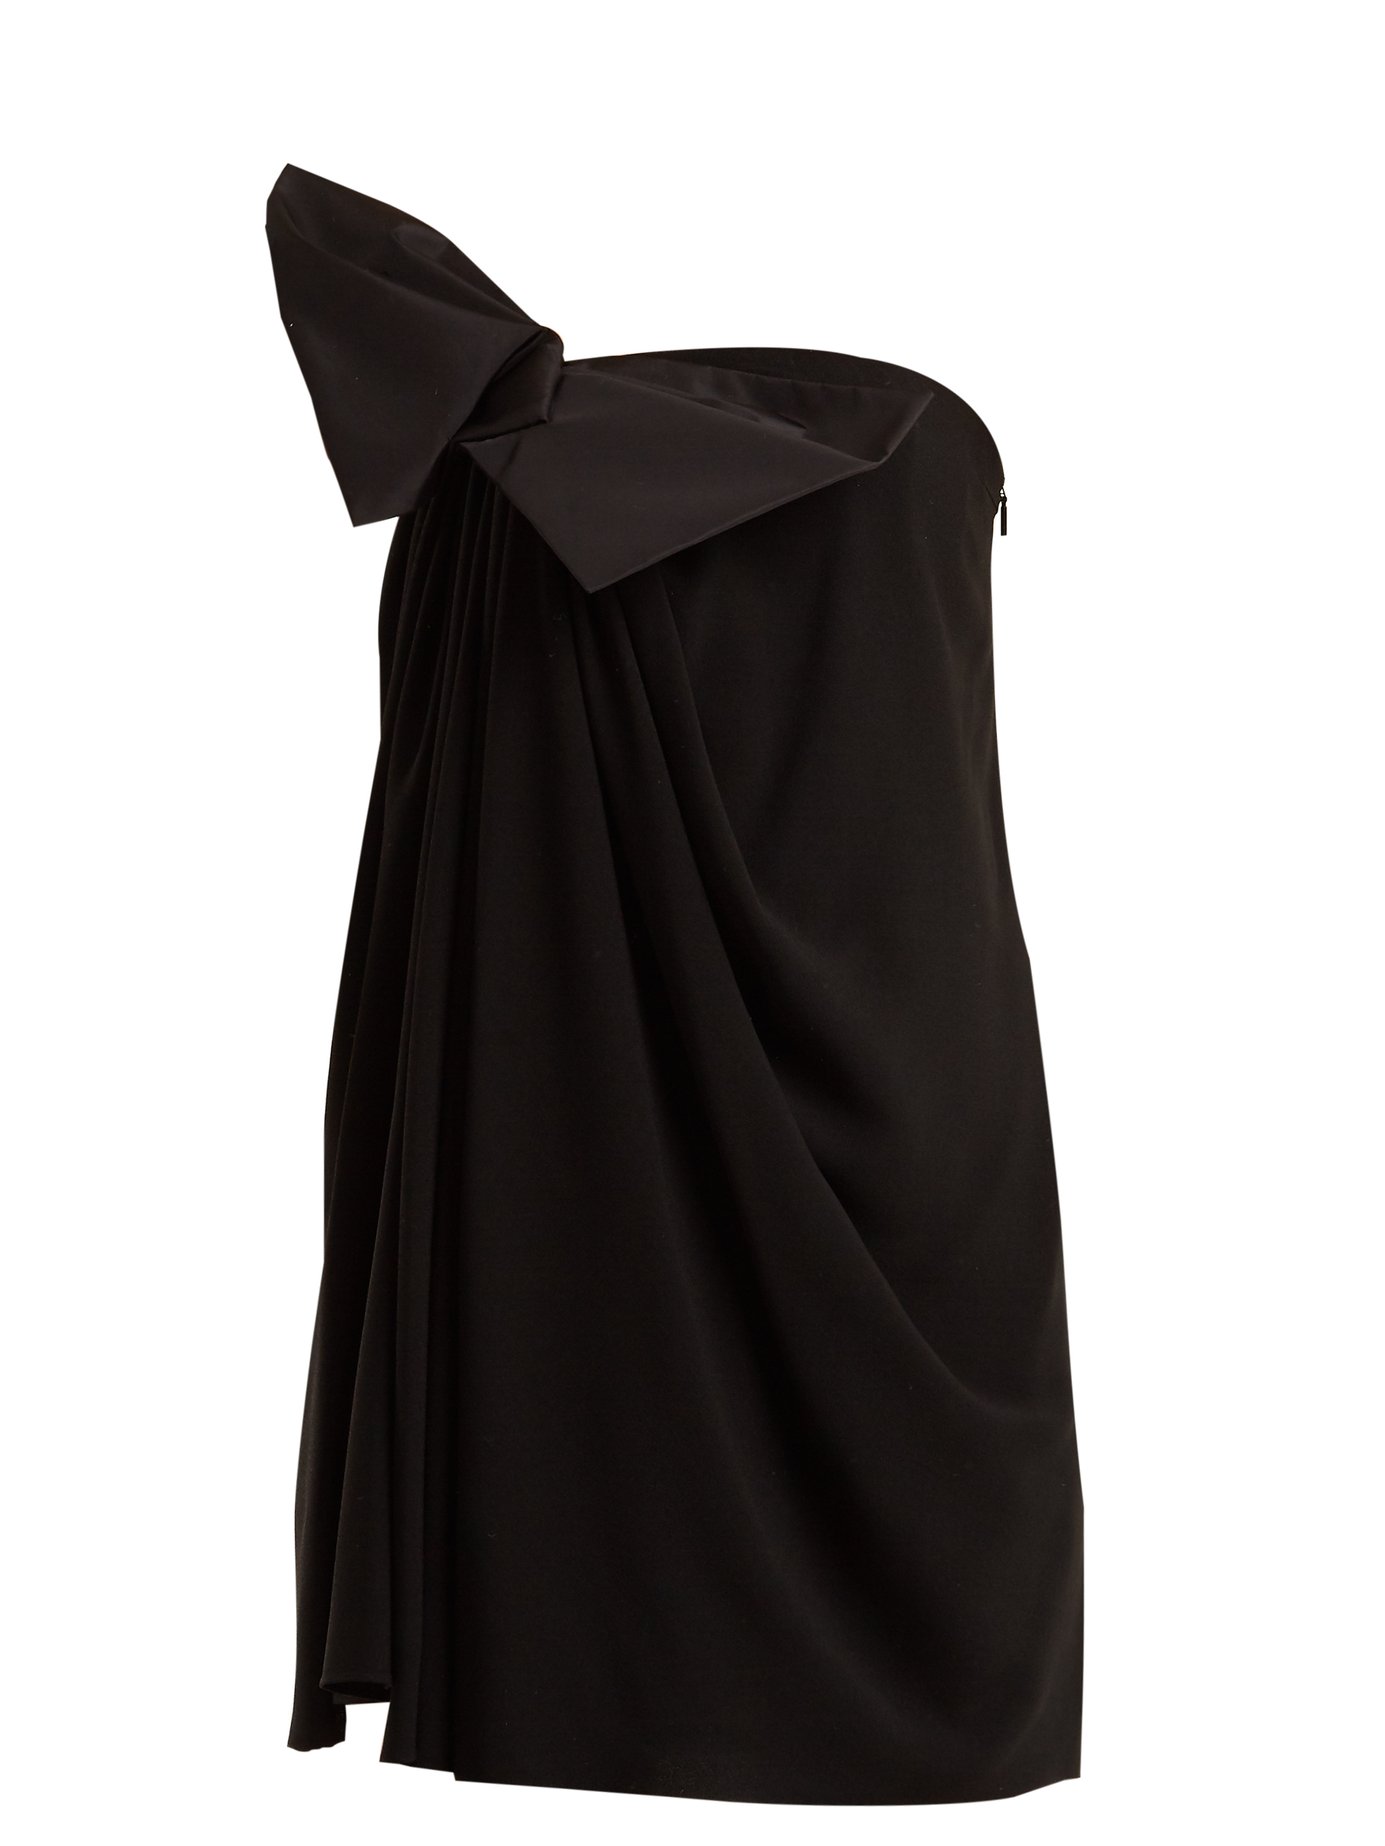 Saint Laurent - Bow-Embellished Strapless Crepe Dress | ABOUT ICONS